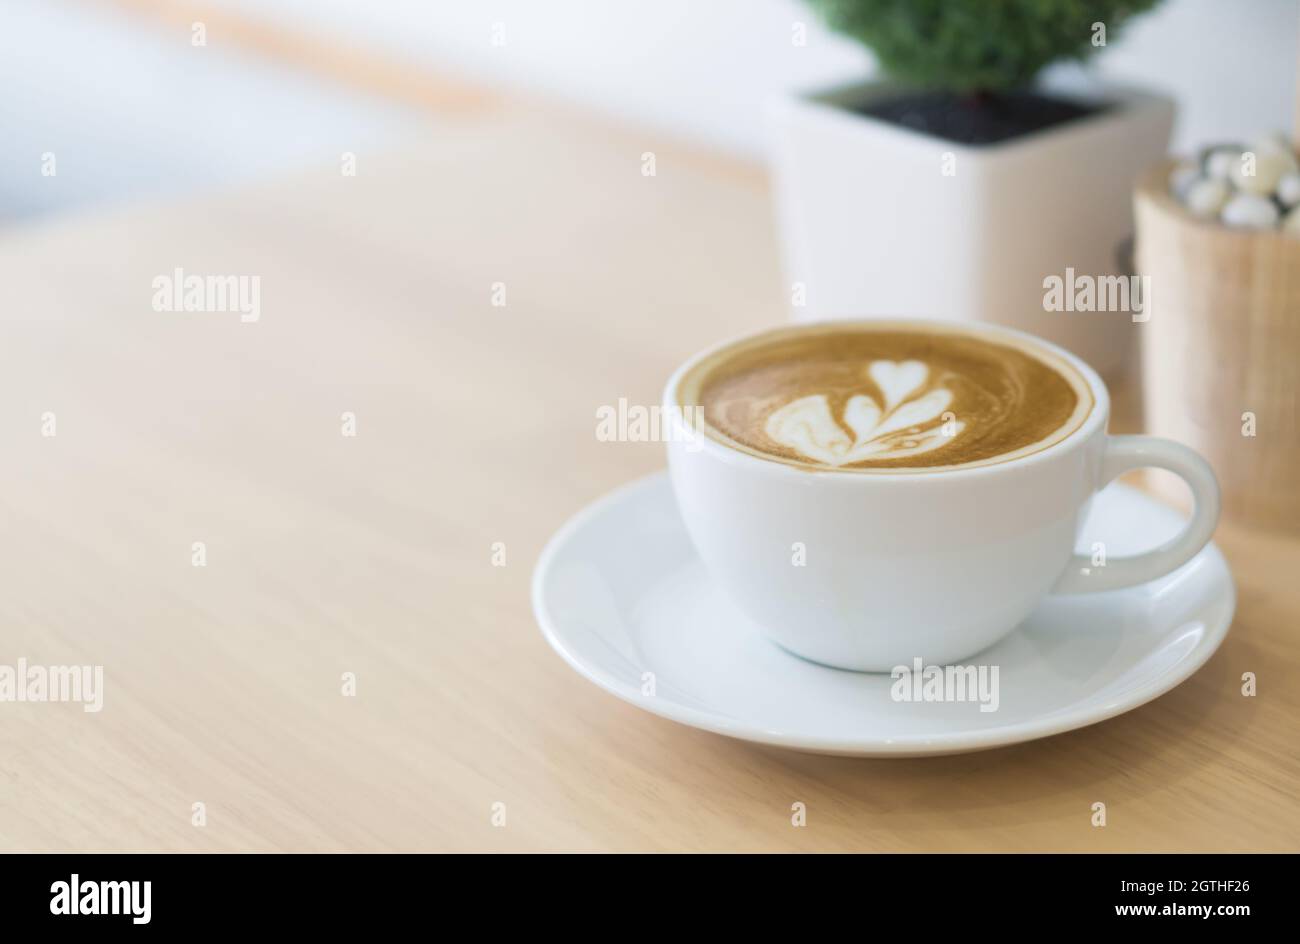 High Angle View Of Cappuccino On Wooden Table Stock Photo